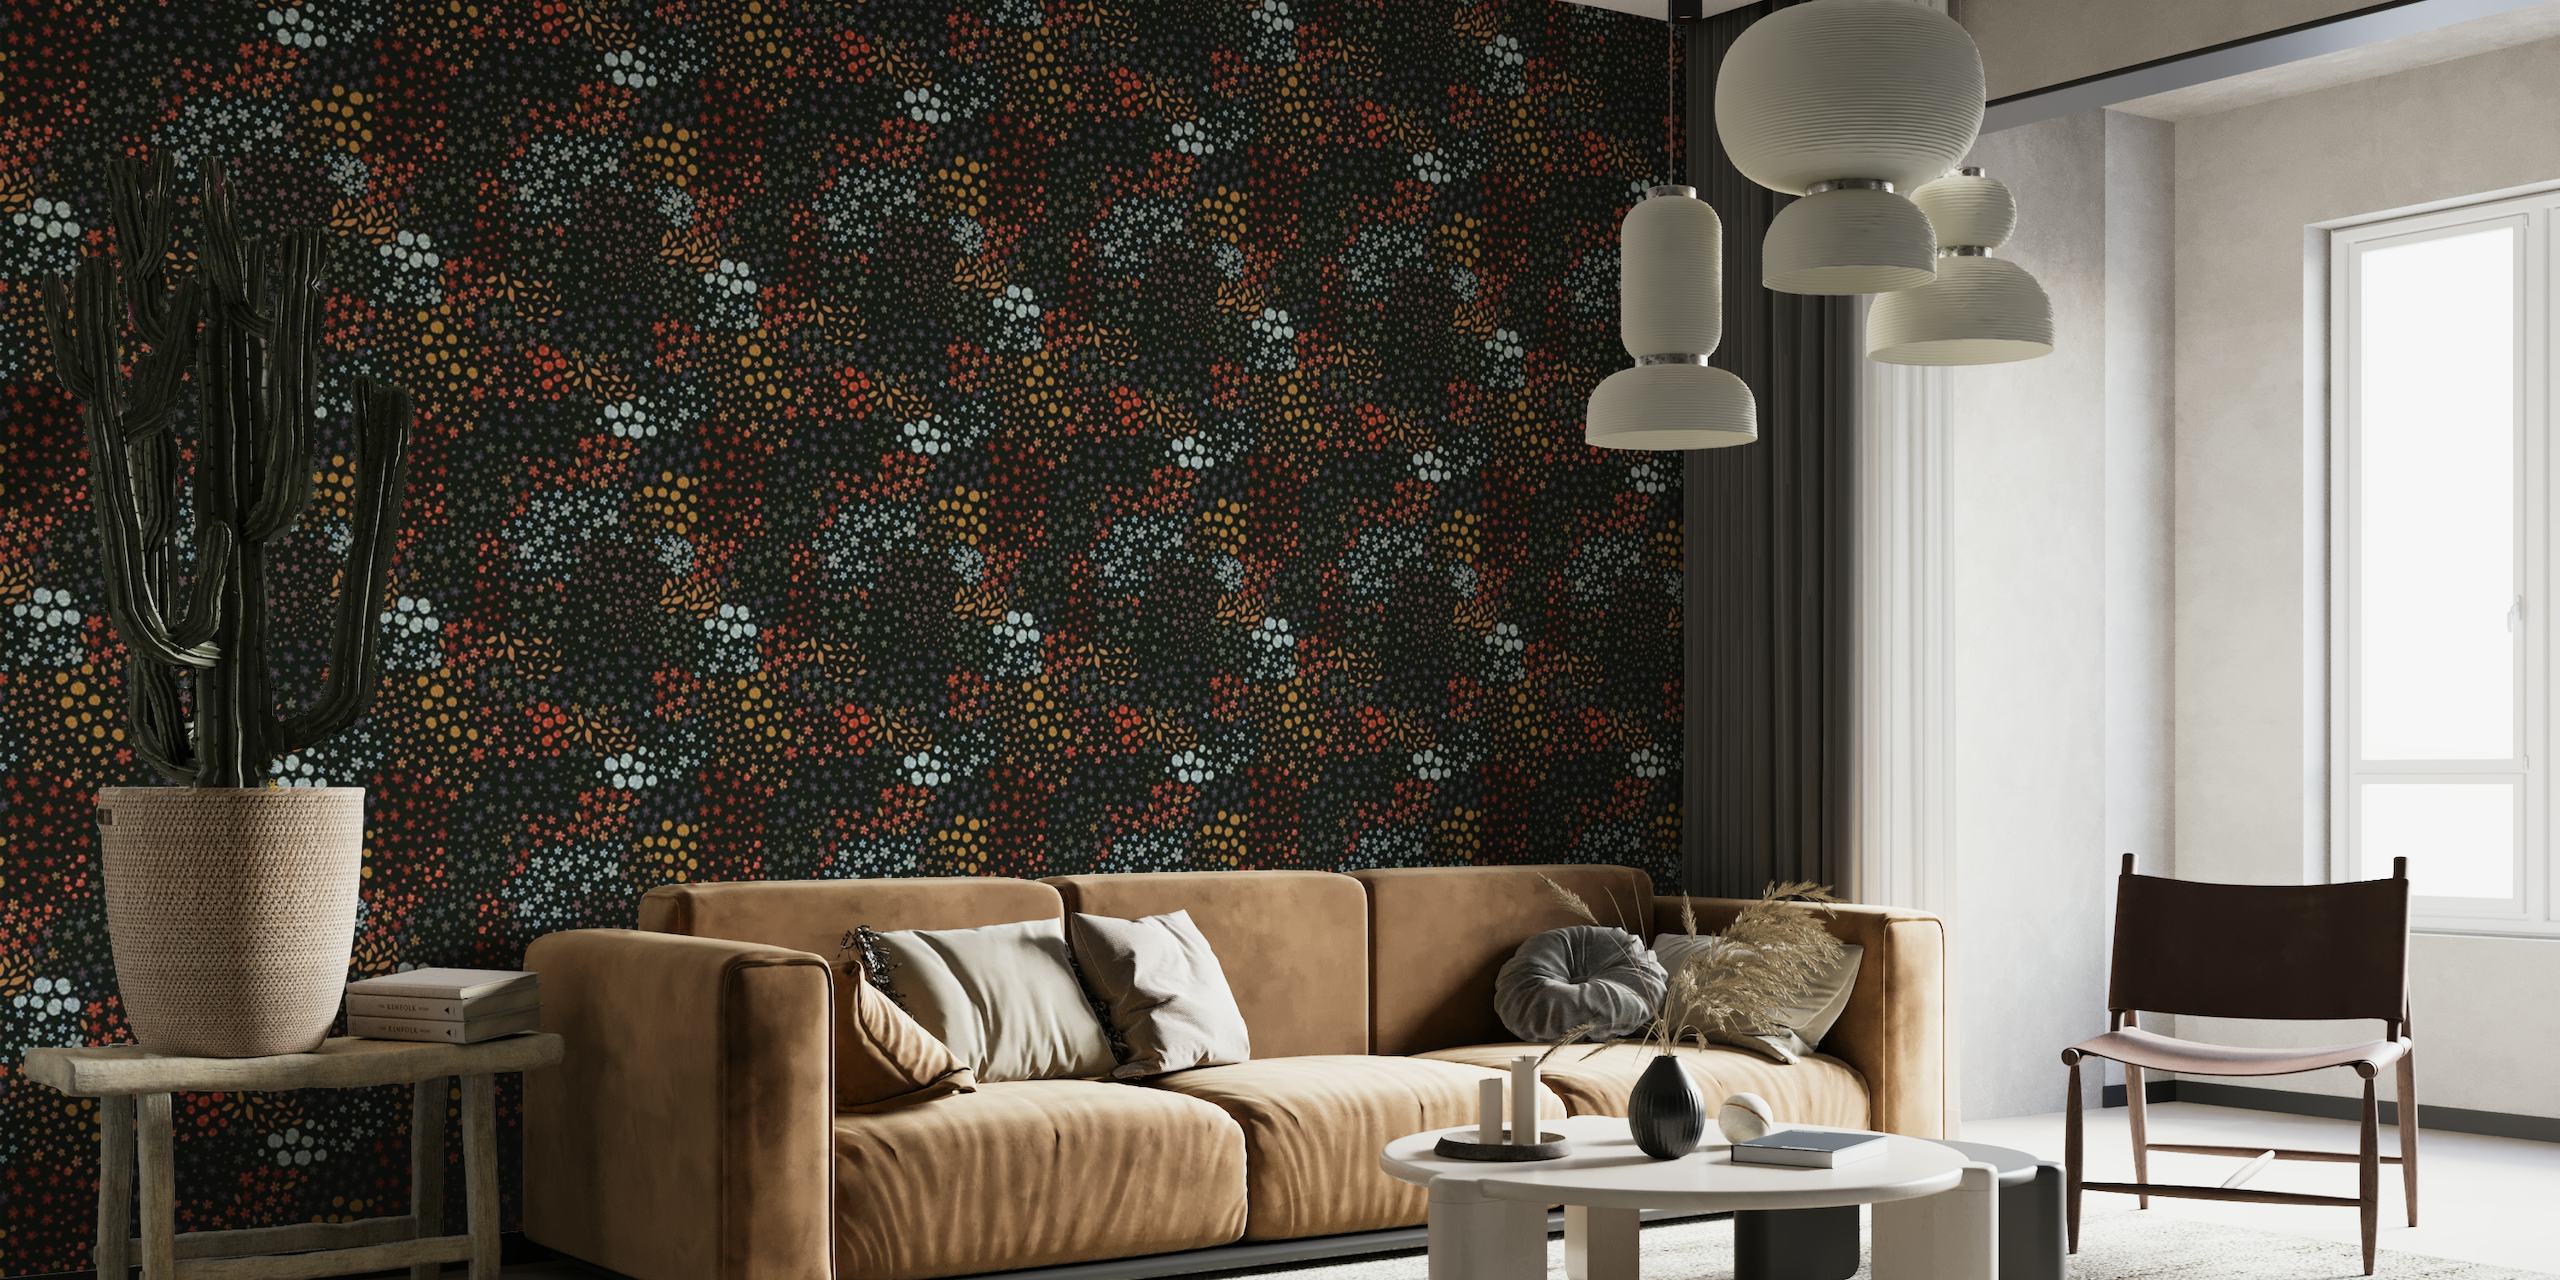 Tiny plum flowers in spring-inspired colors on a black background wall mural